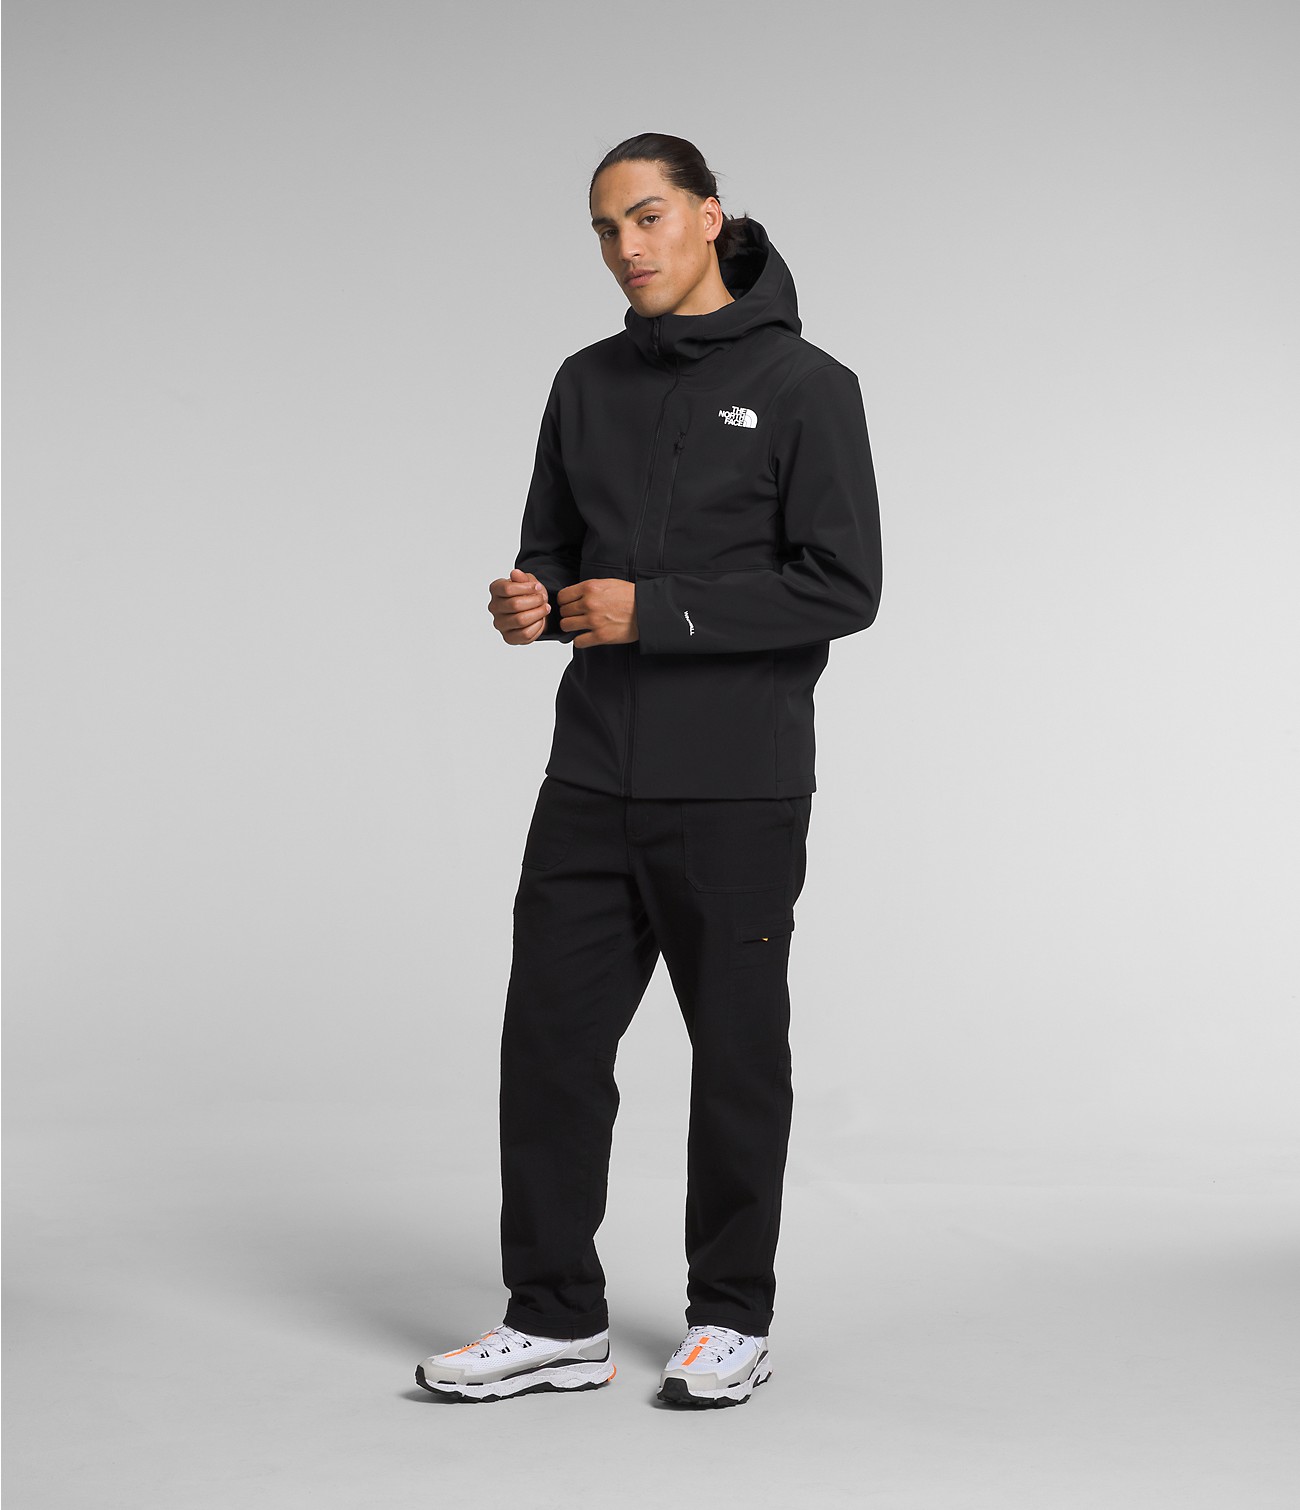 Men’s Apex Bionic 3 Hoodie | The North Face